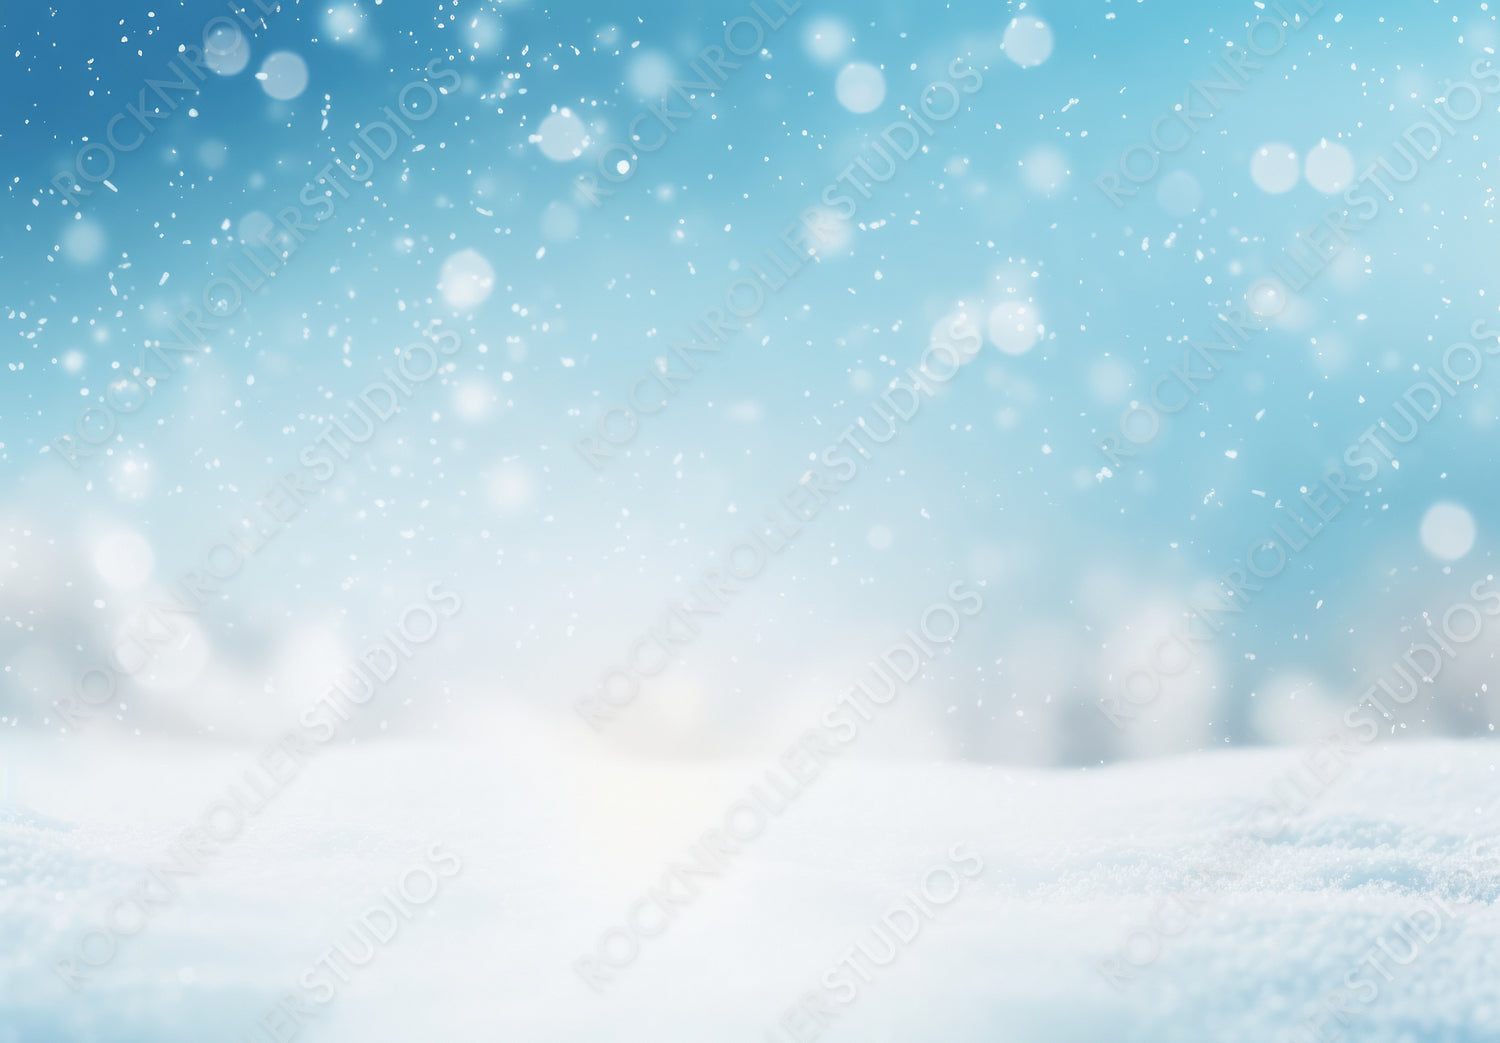 Winter natural snow background with snowdrifts, beautiful light and snow flakes on blue sky, beauty bokeh circles, copy space.